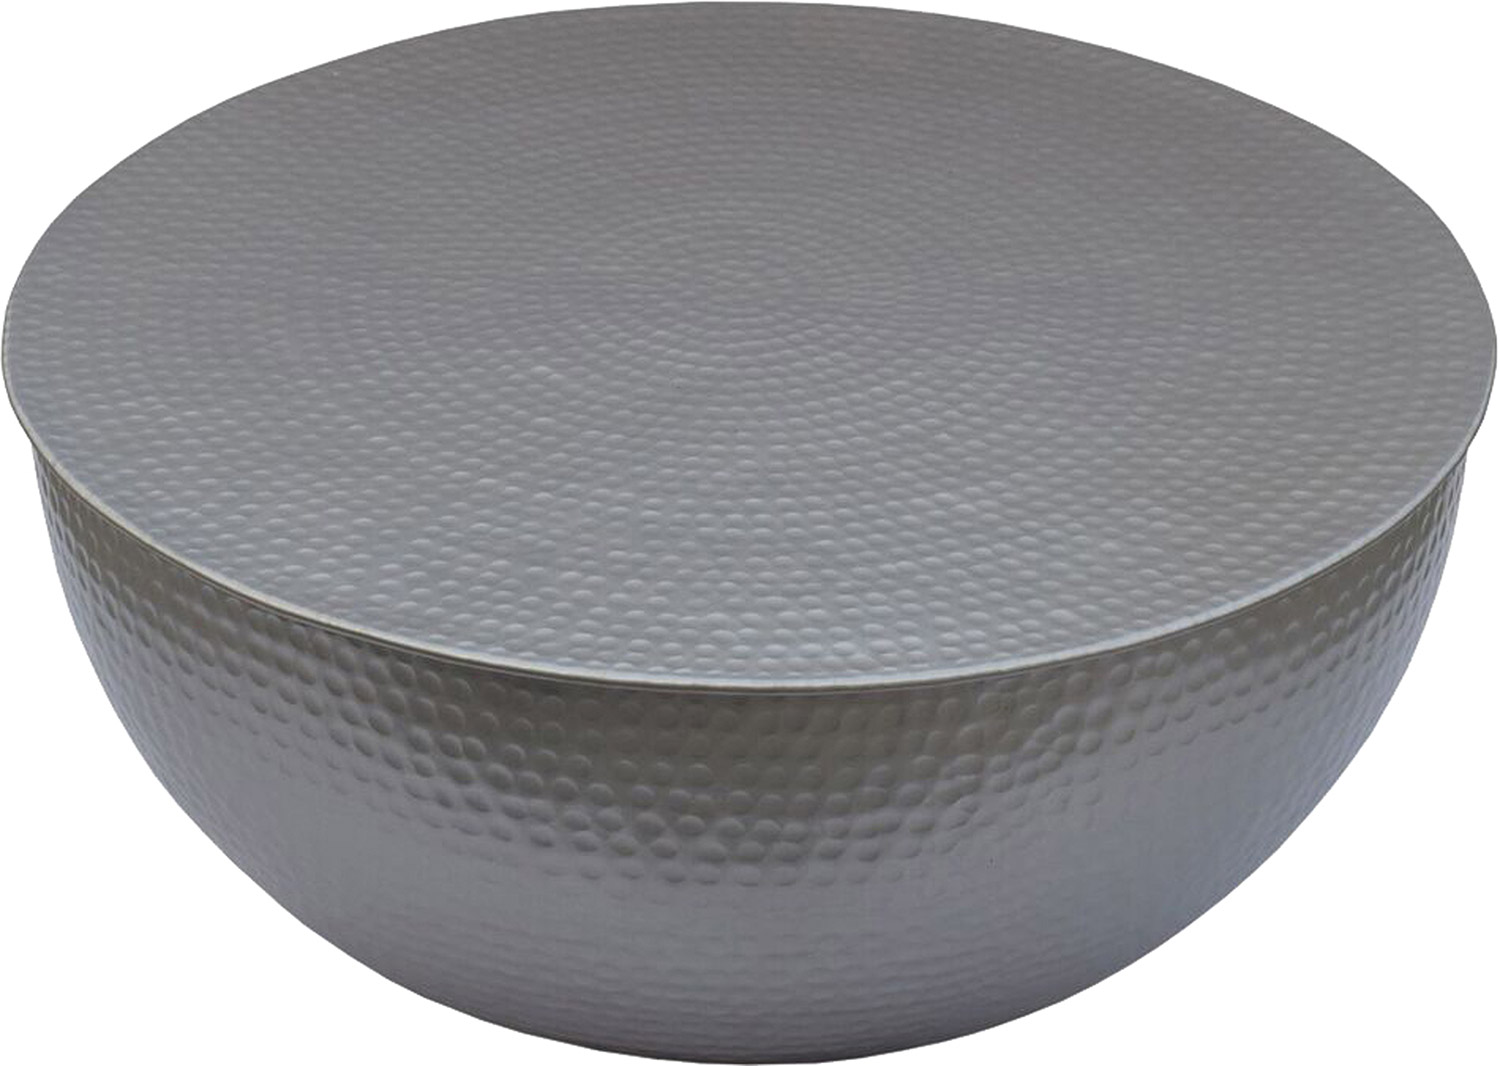 Ren-Wil Cooper Coffee Table - Pewter